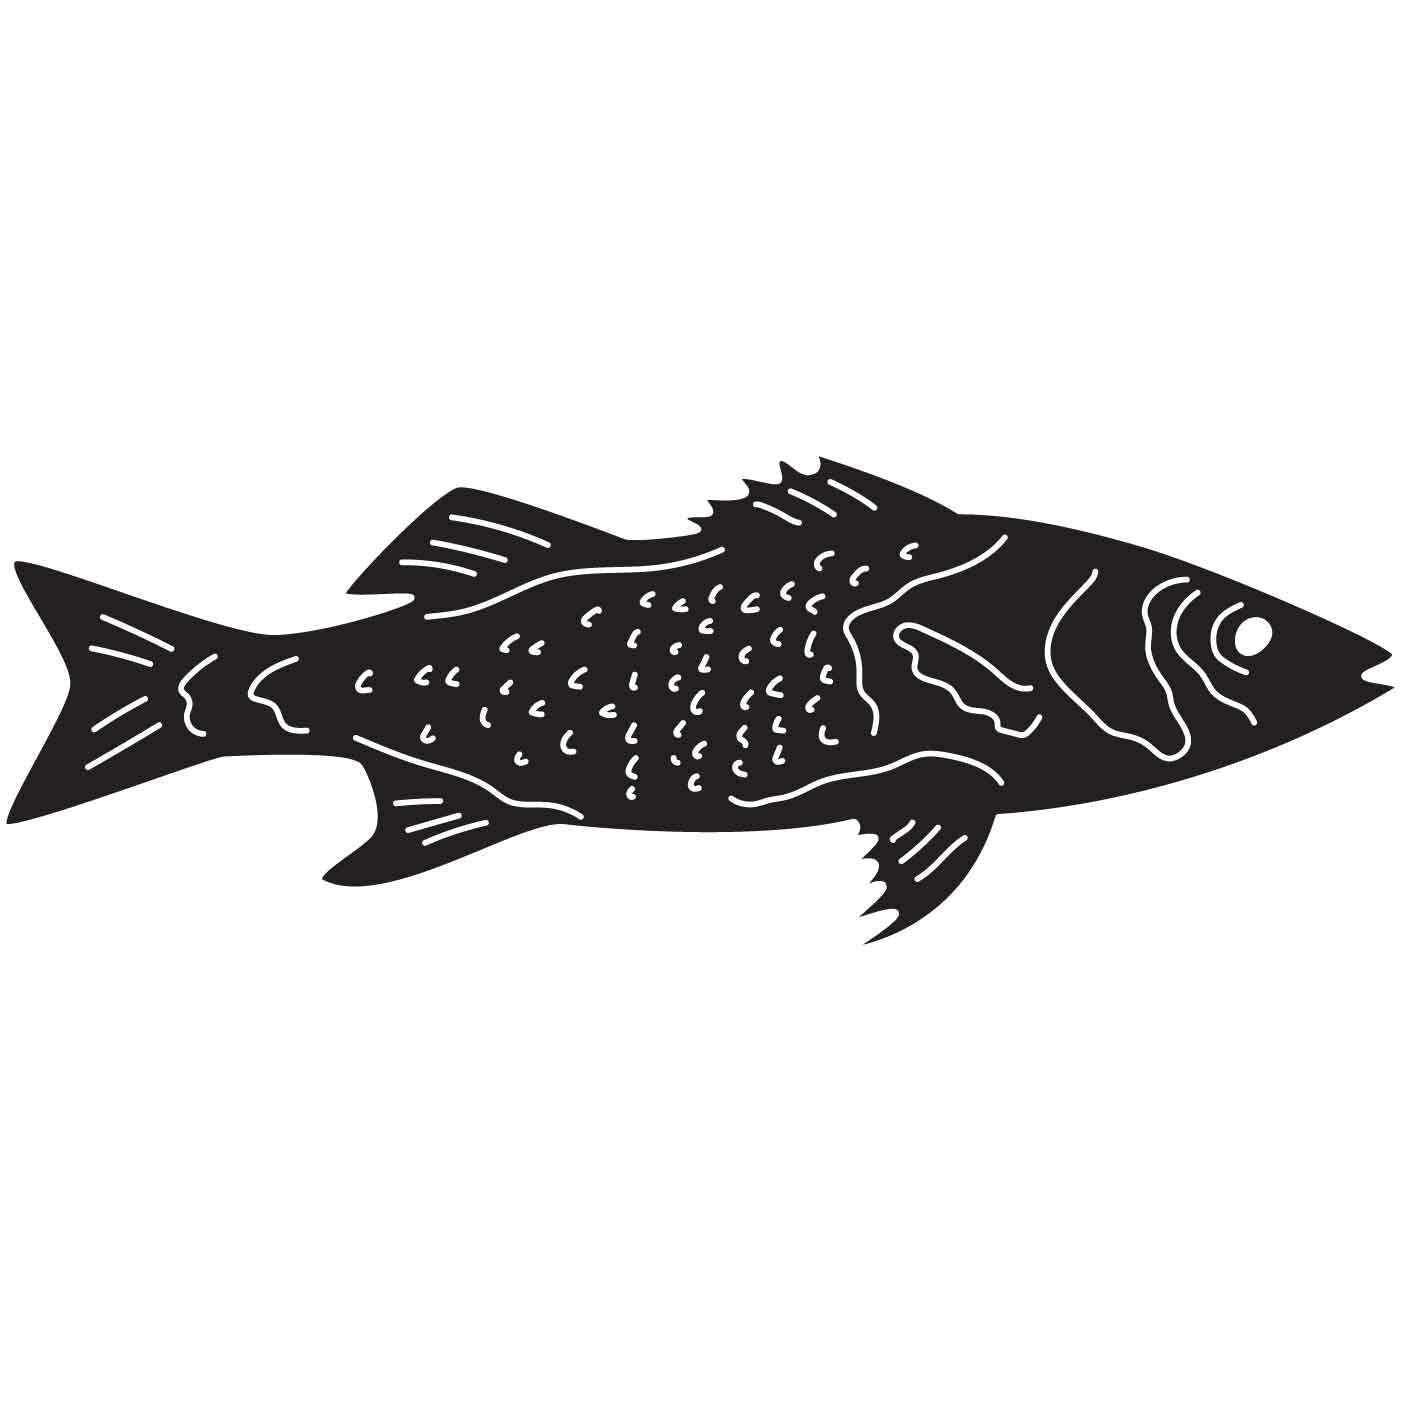 Underwater Ocean and Sea Fish-Free DXF files Cut Ready CNC Designs-dxfforcnc.com